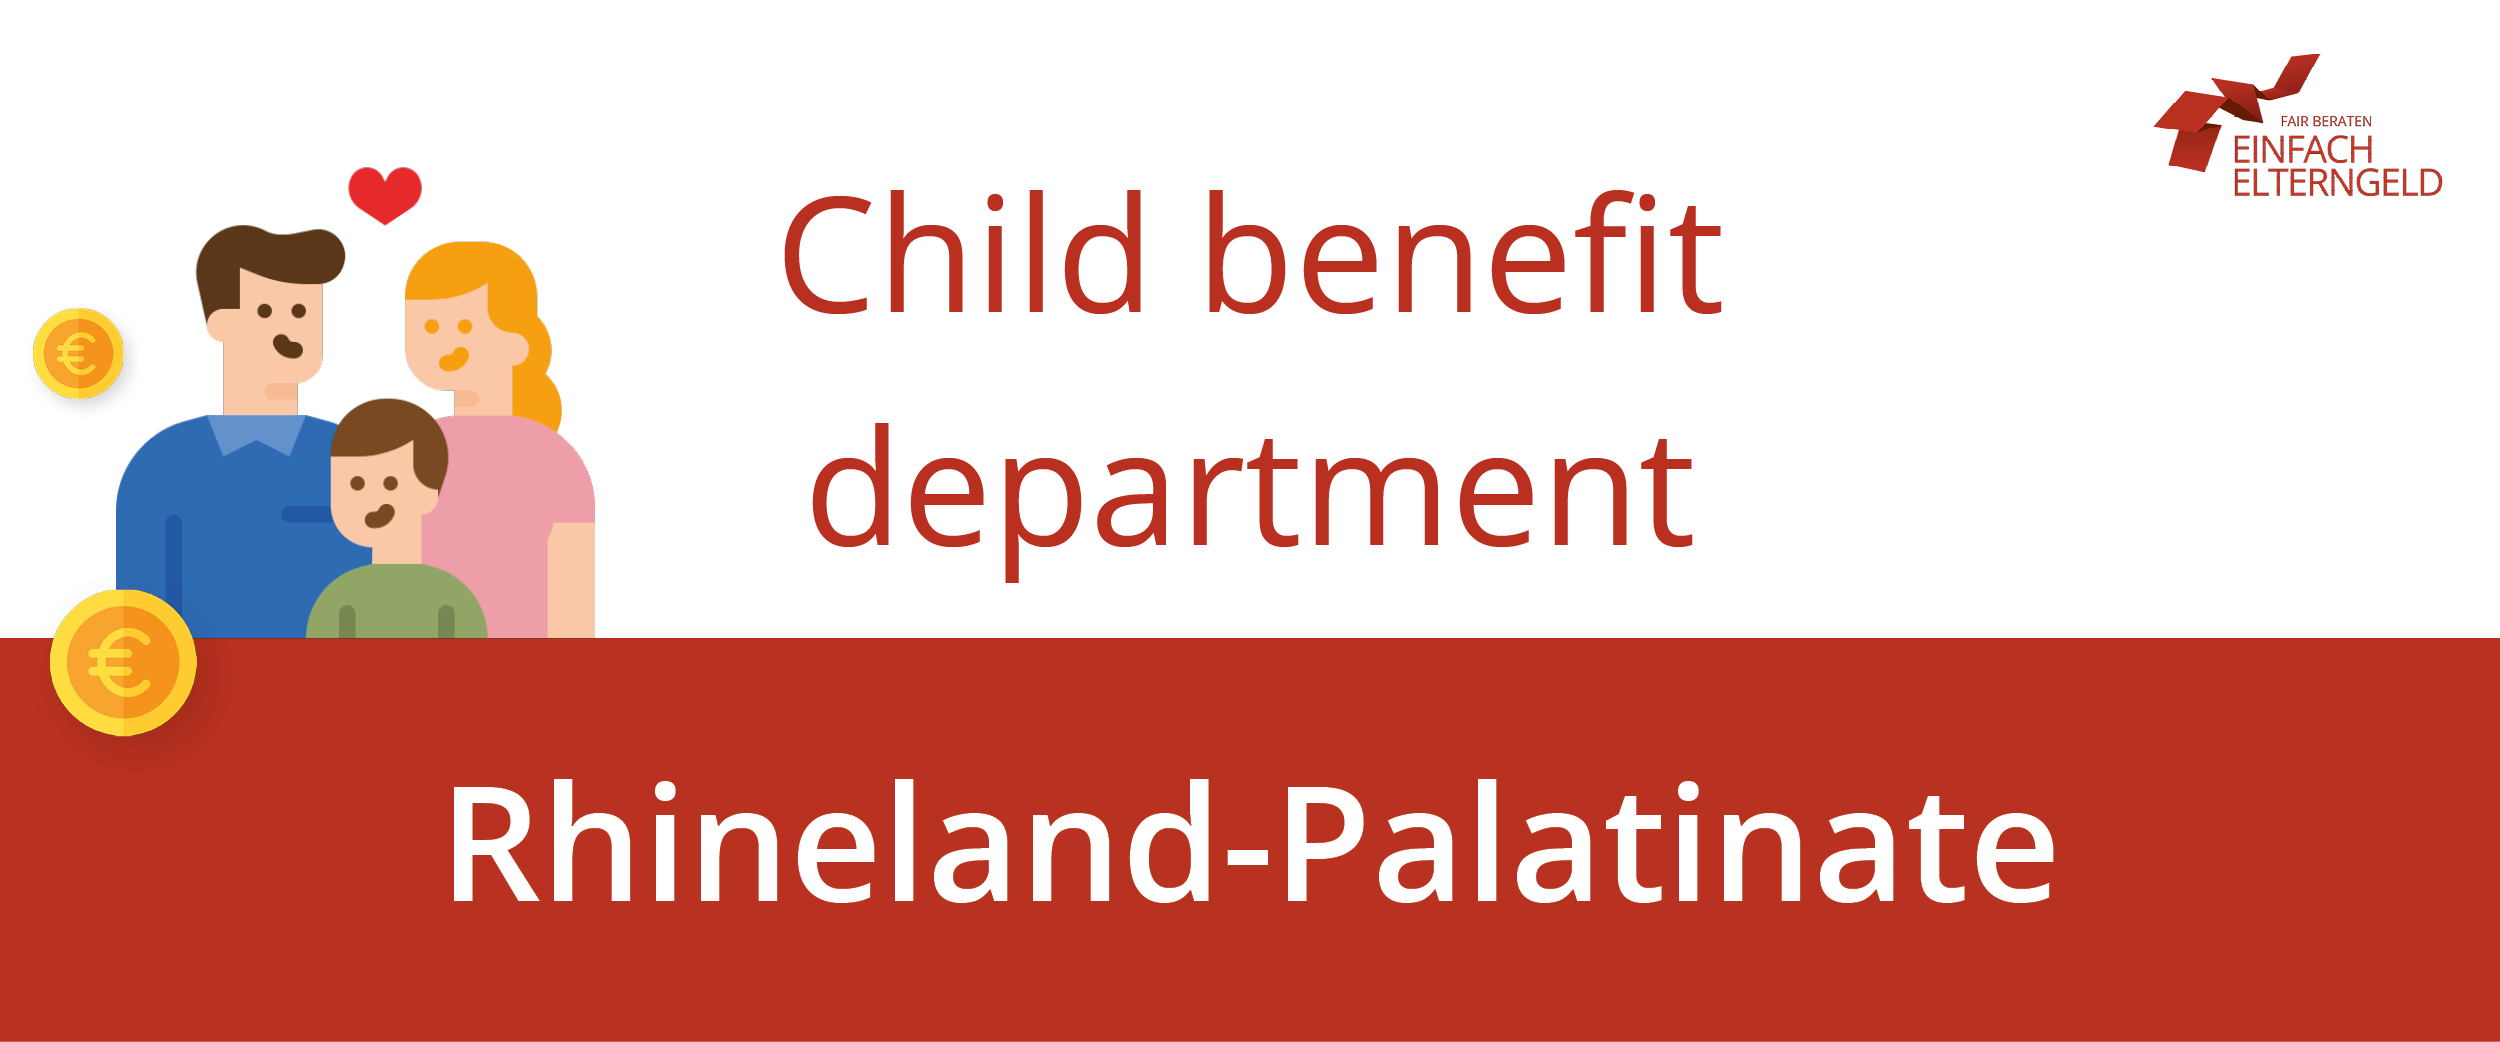 We introduce you to the child benefit department Rhineland-Palatinate.